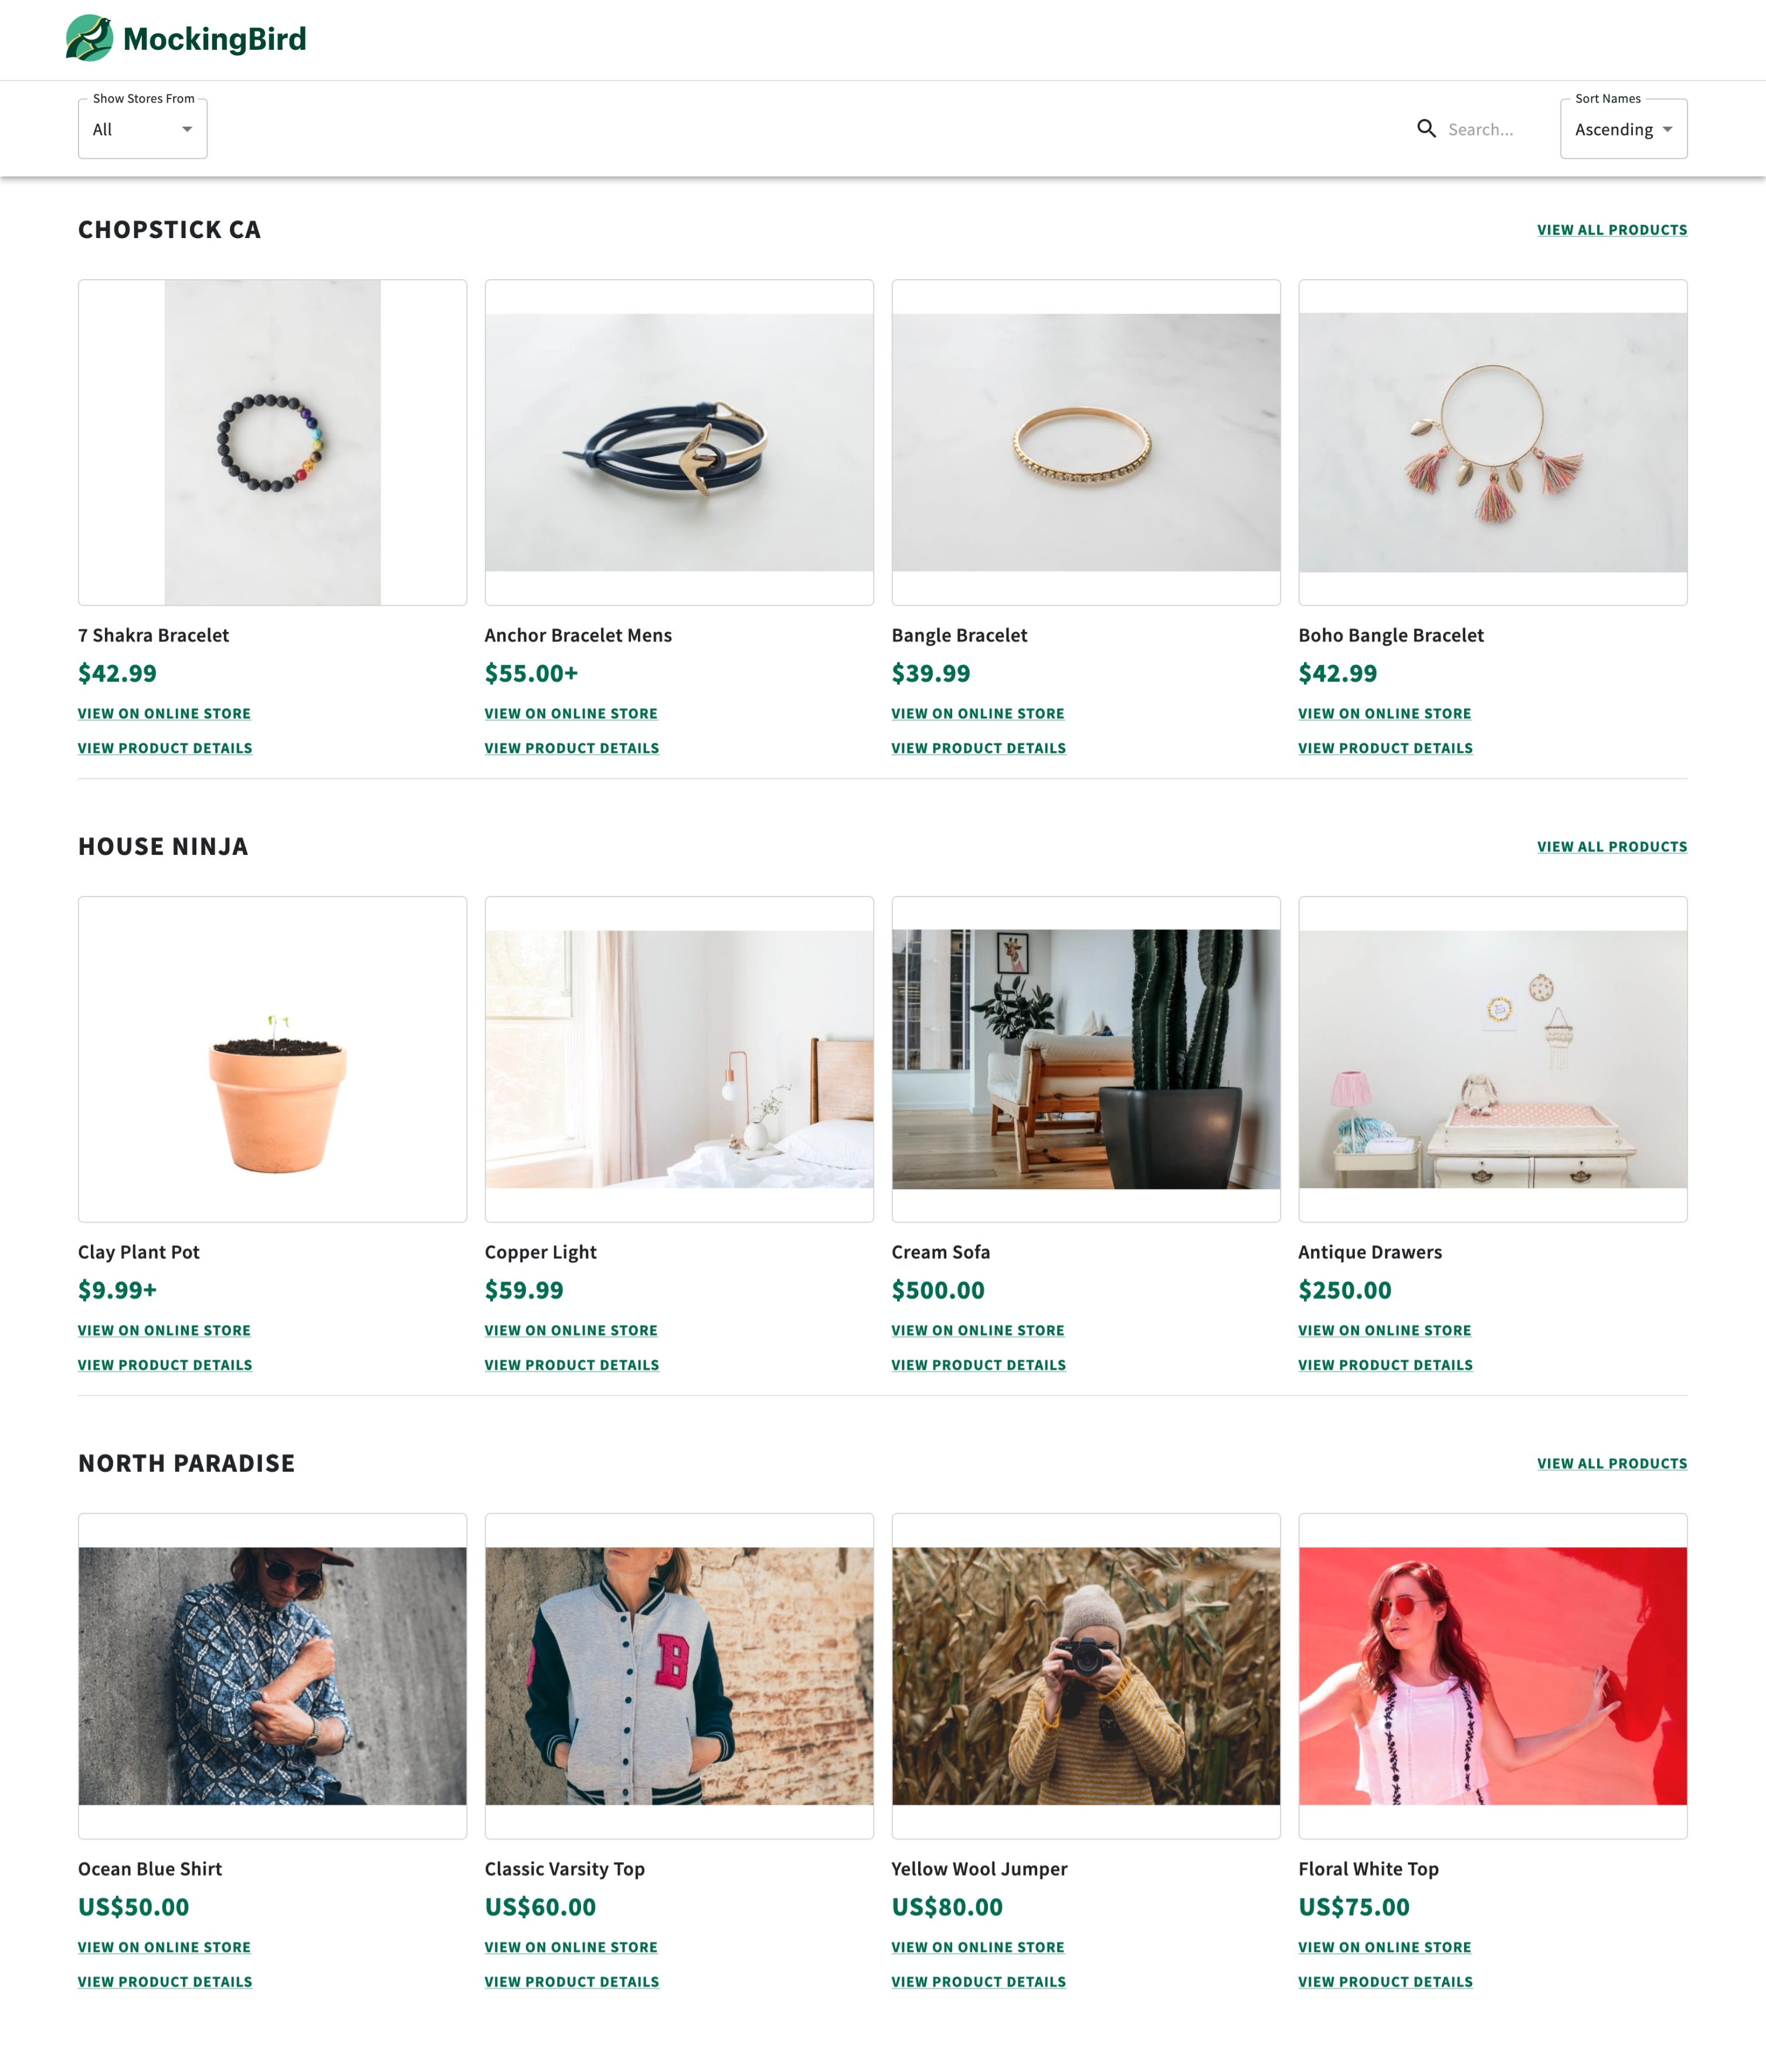 An image of the marketplace homepage where products include a link to view product details